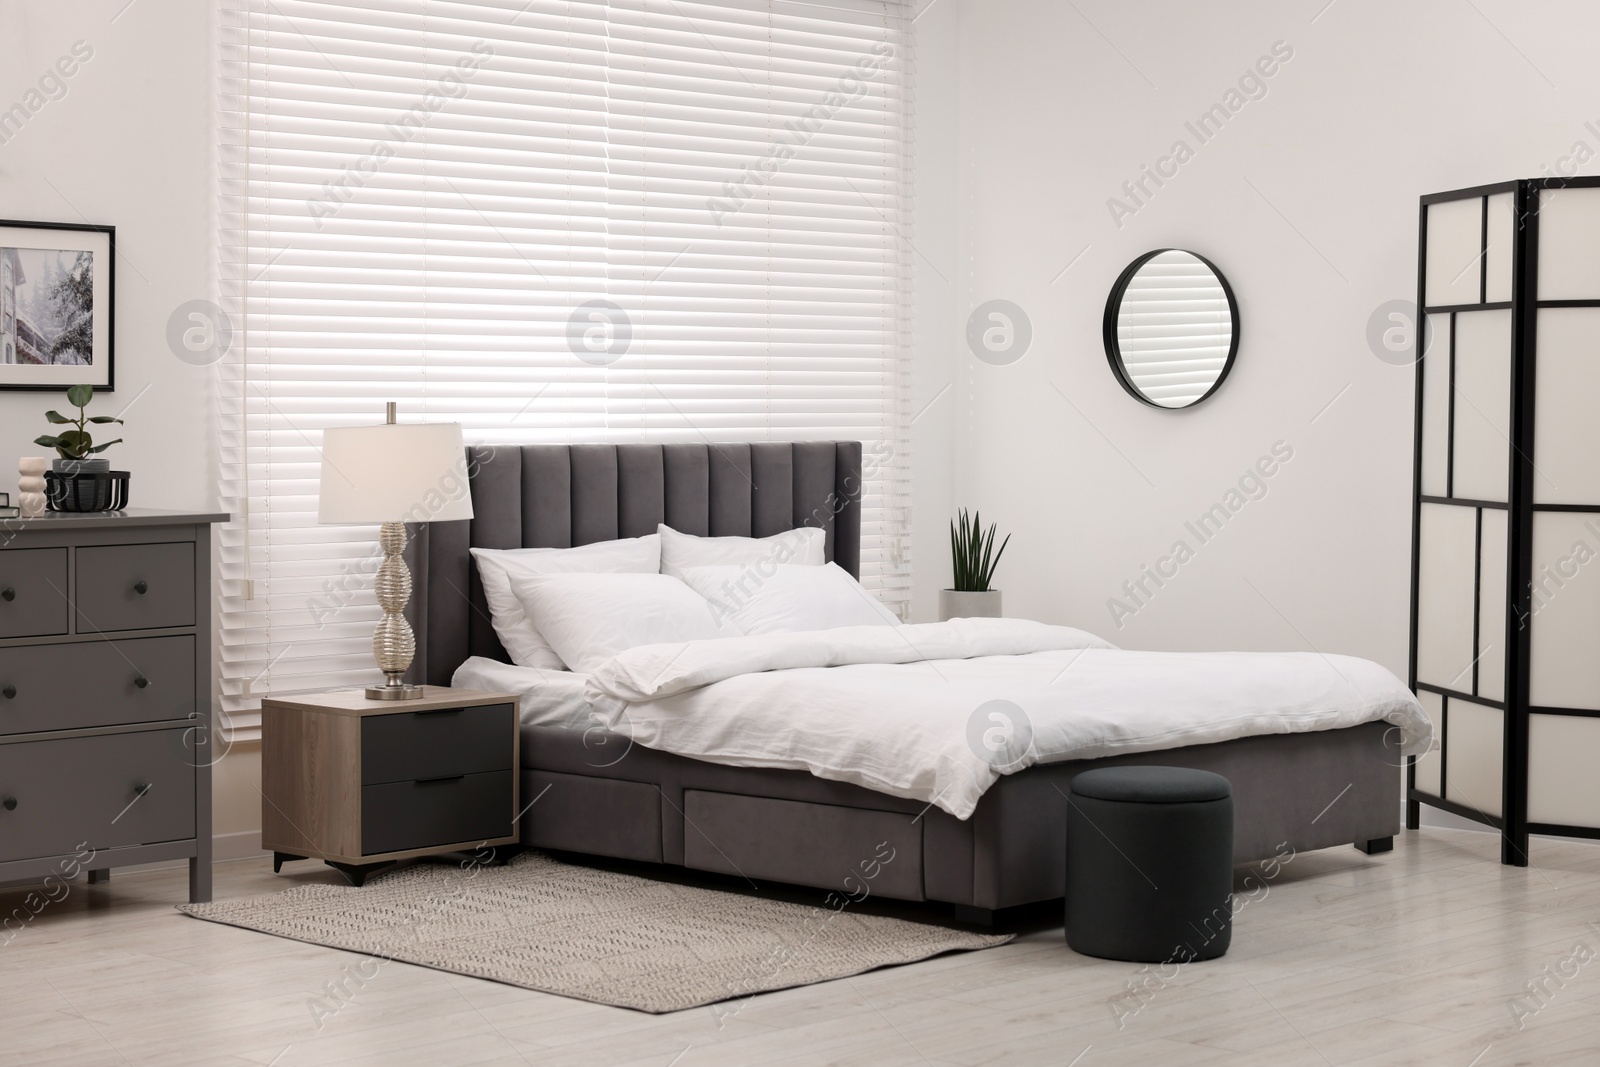 Photo of Stylish bedroom interior with large bed, chest of drawers and lamp